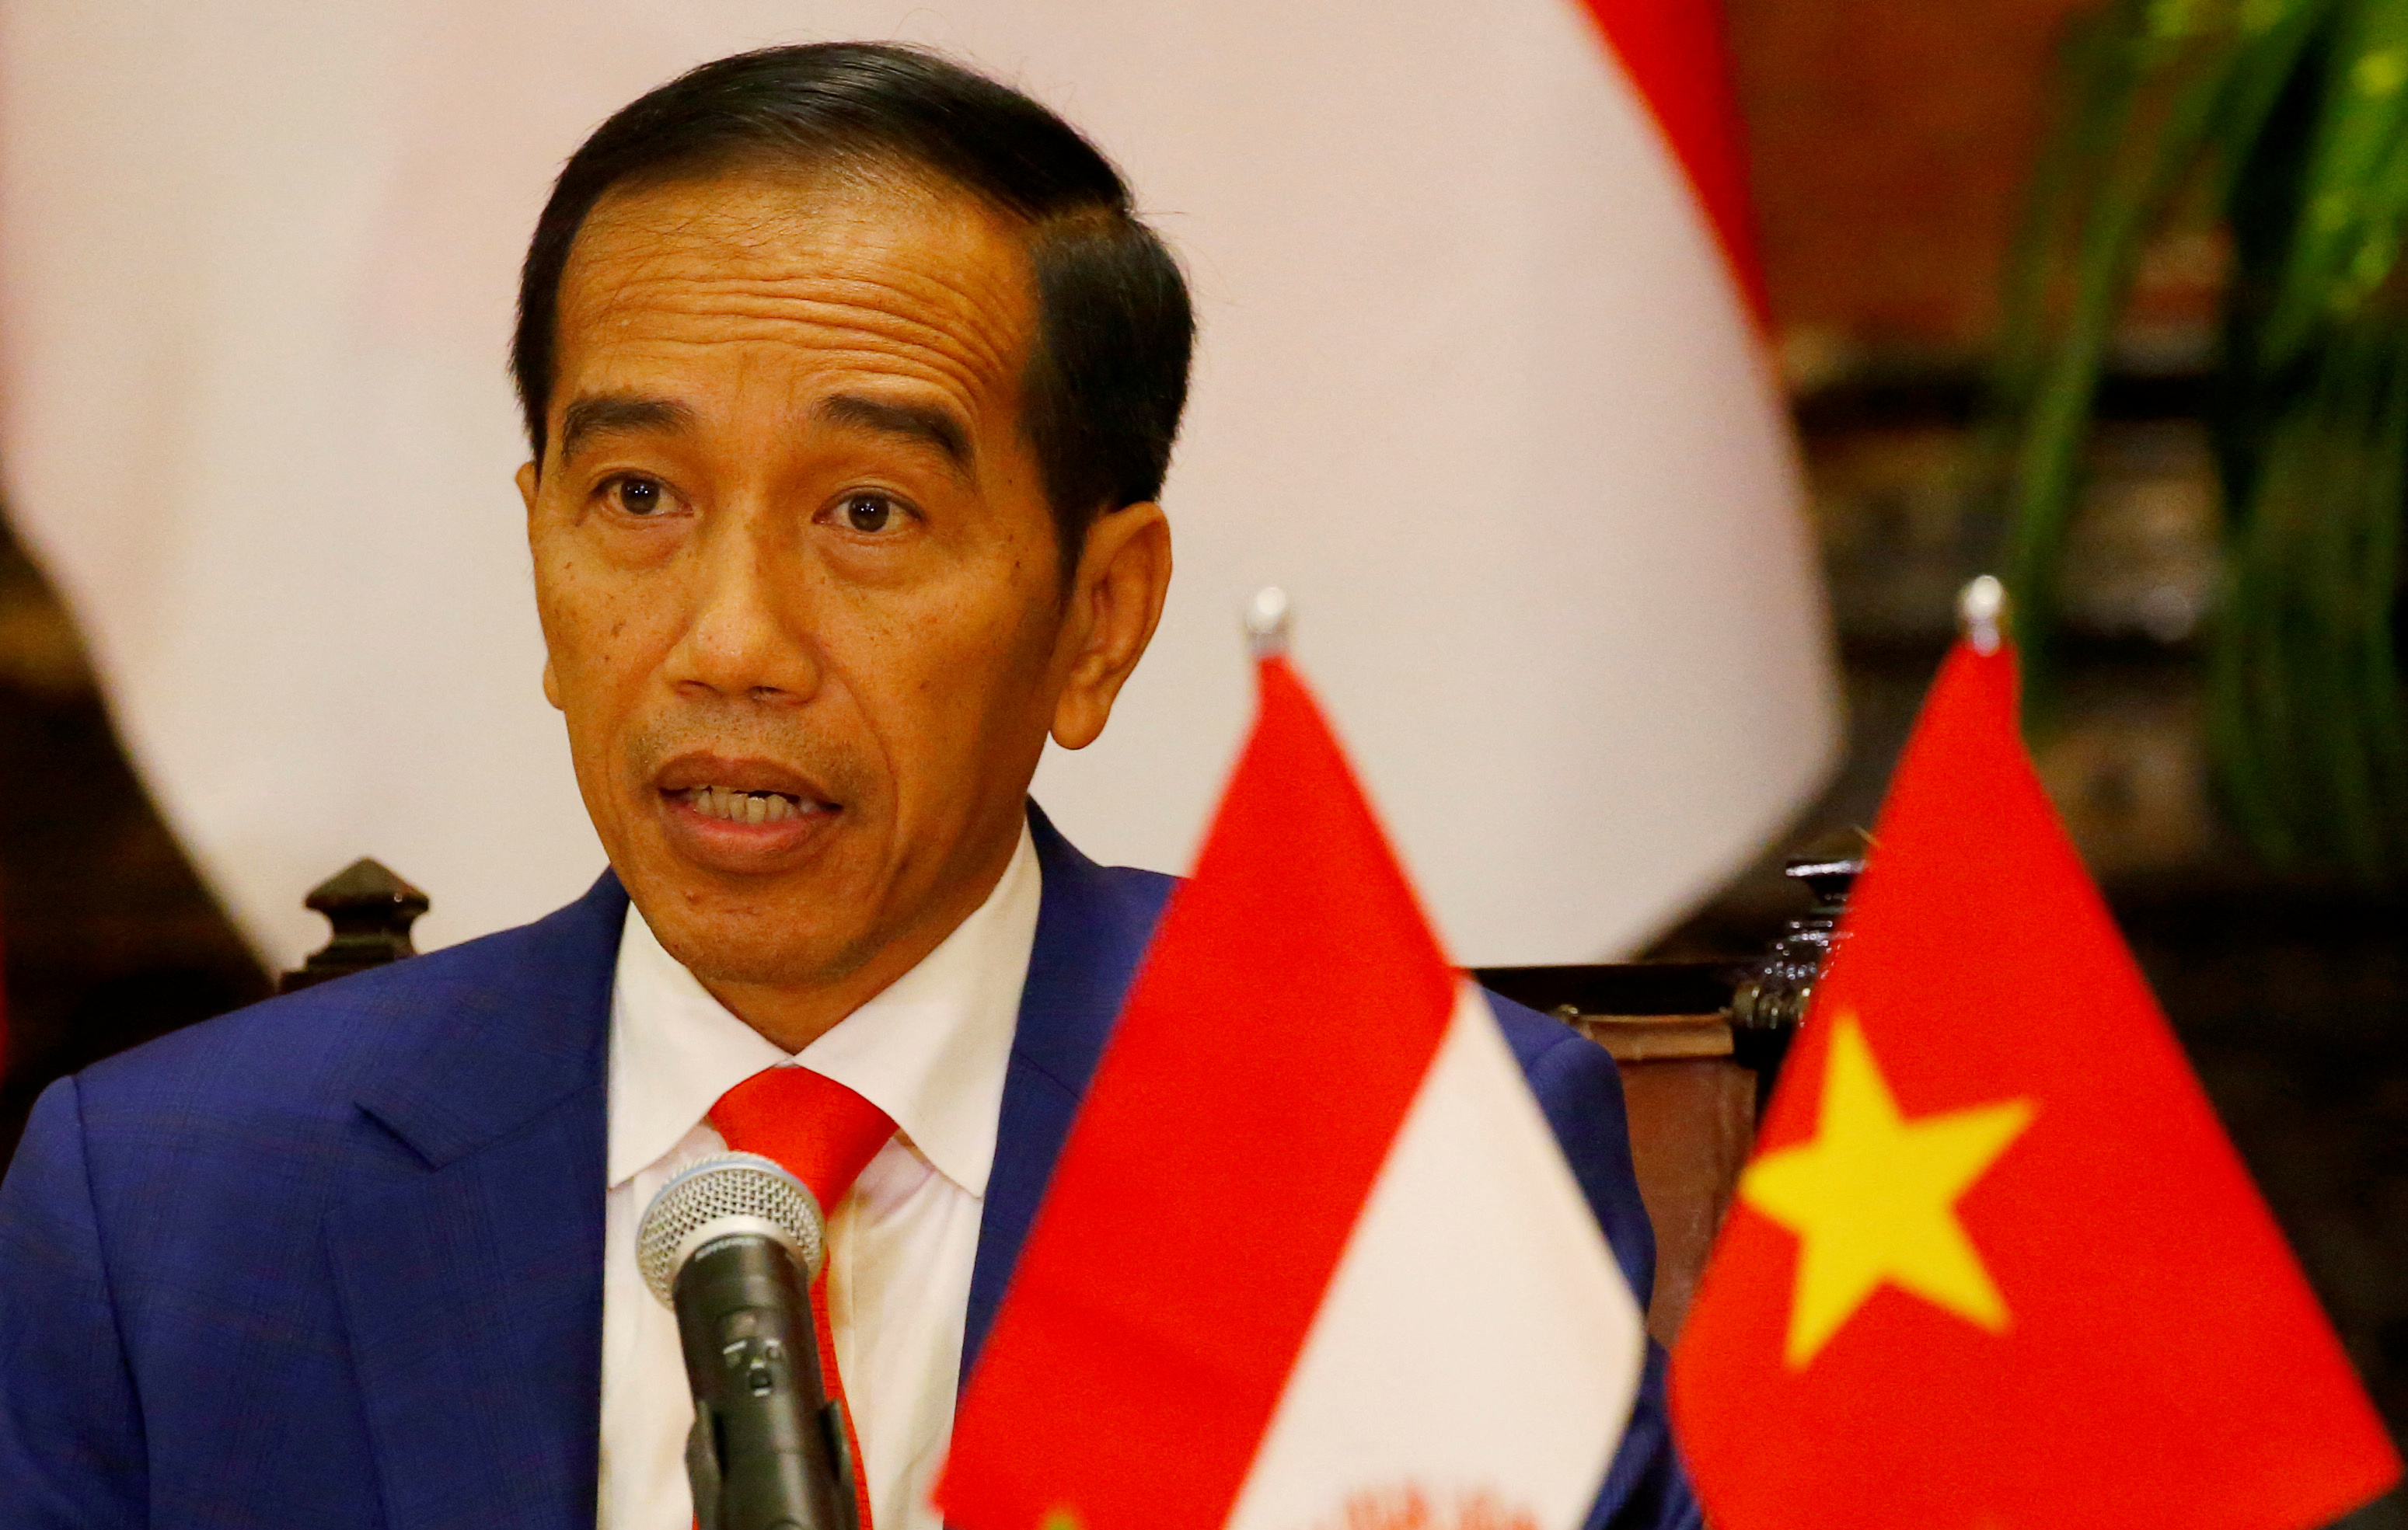 Indonesian President Joko Widodo reads his statement following a signing ceremony at the Presidential Palace in Hanoi, Vietnam September 11, 2018. Bullit Marquez/Pool via REUTERS